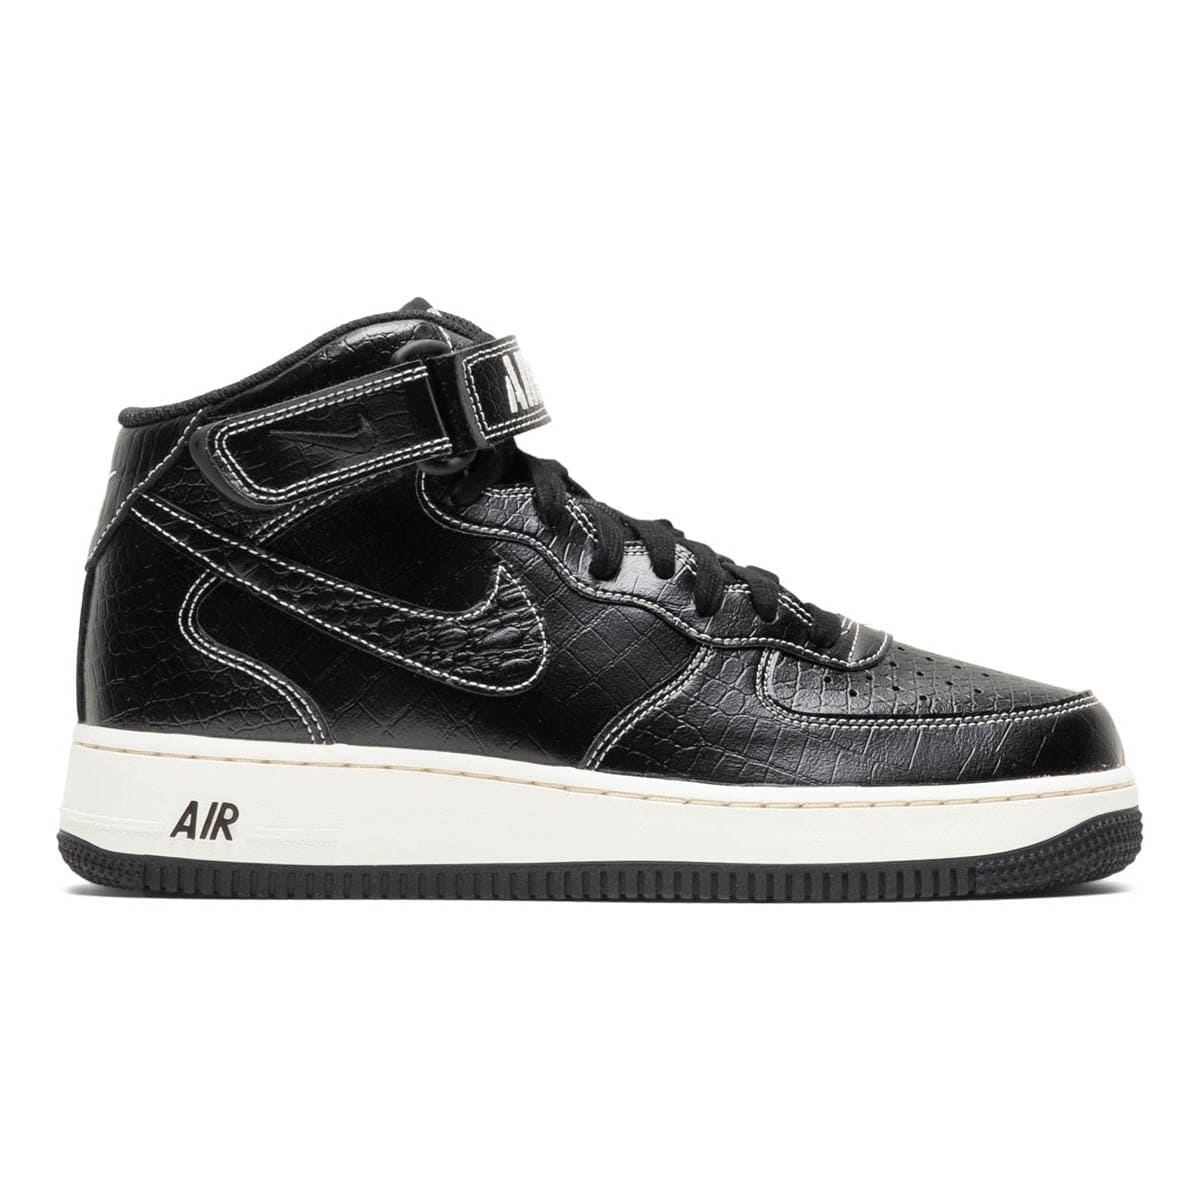 BOX ONLY - Nike Air Force 1 Mid '07 Black Size Men 8 US - BOX & TISSUE ONLY